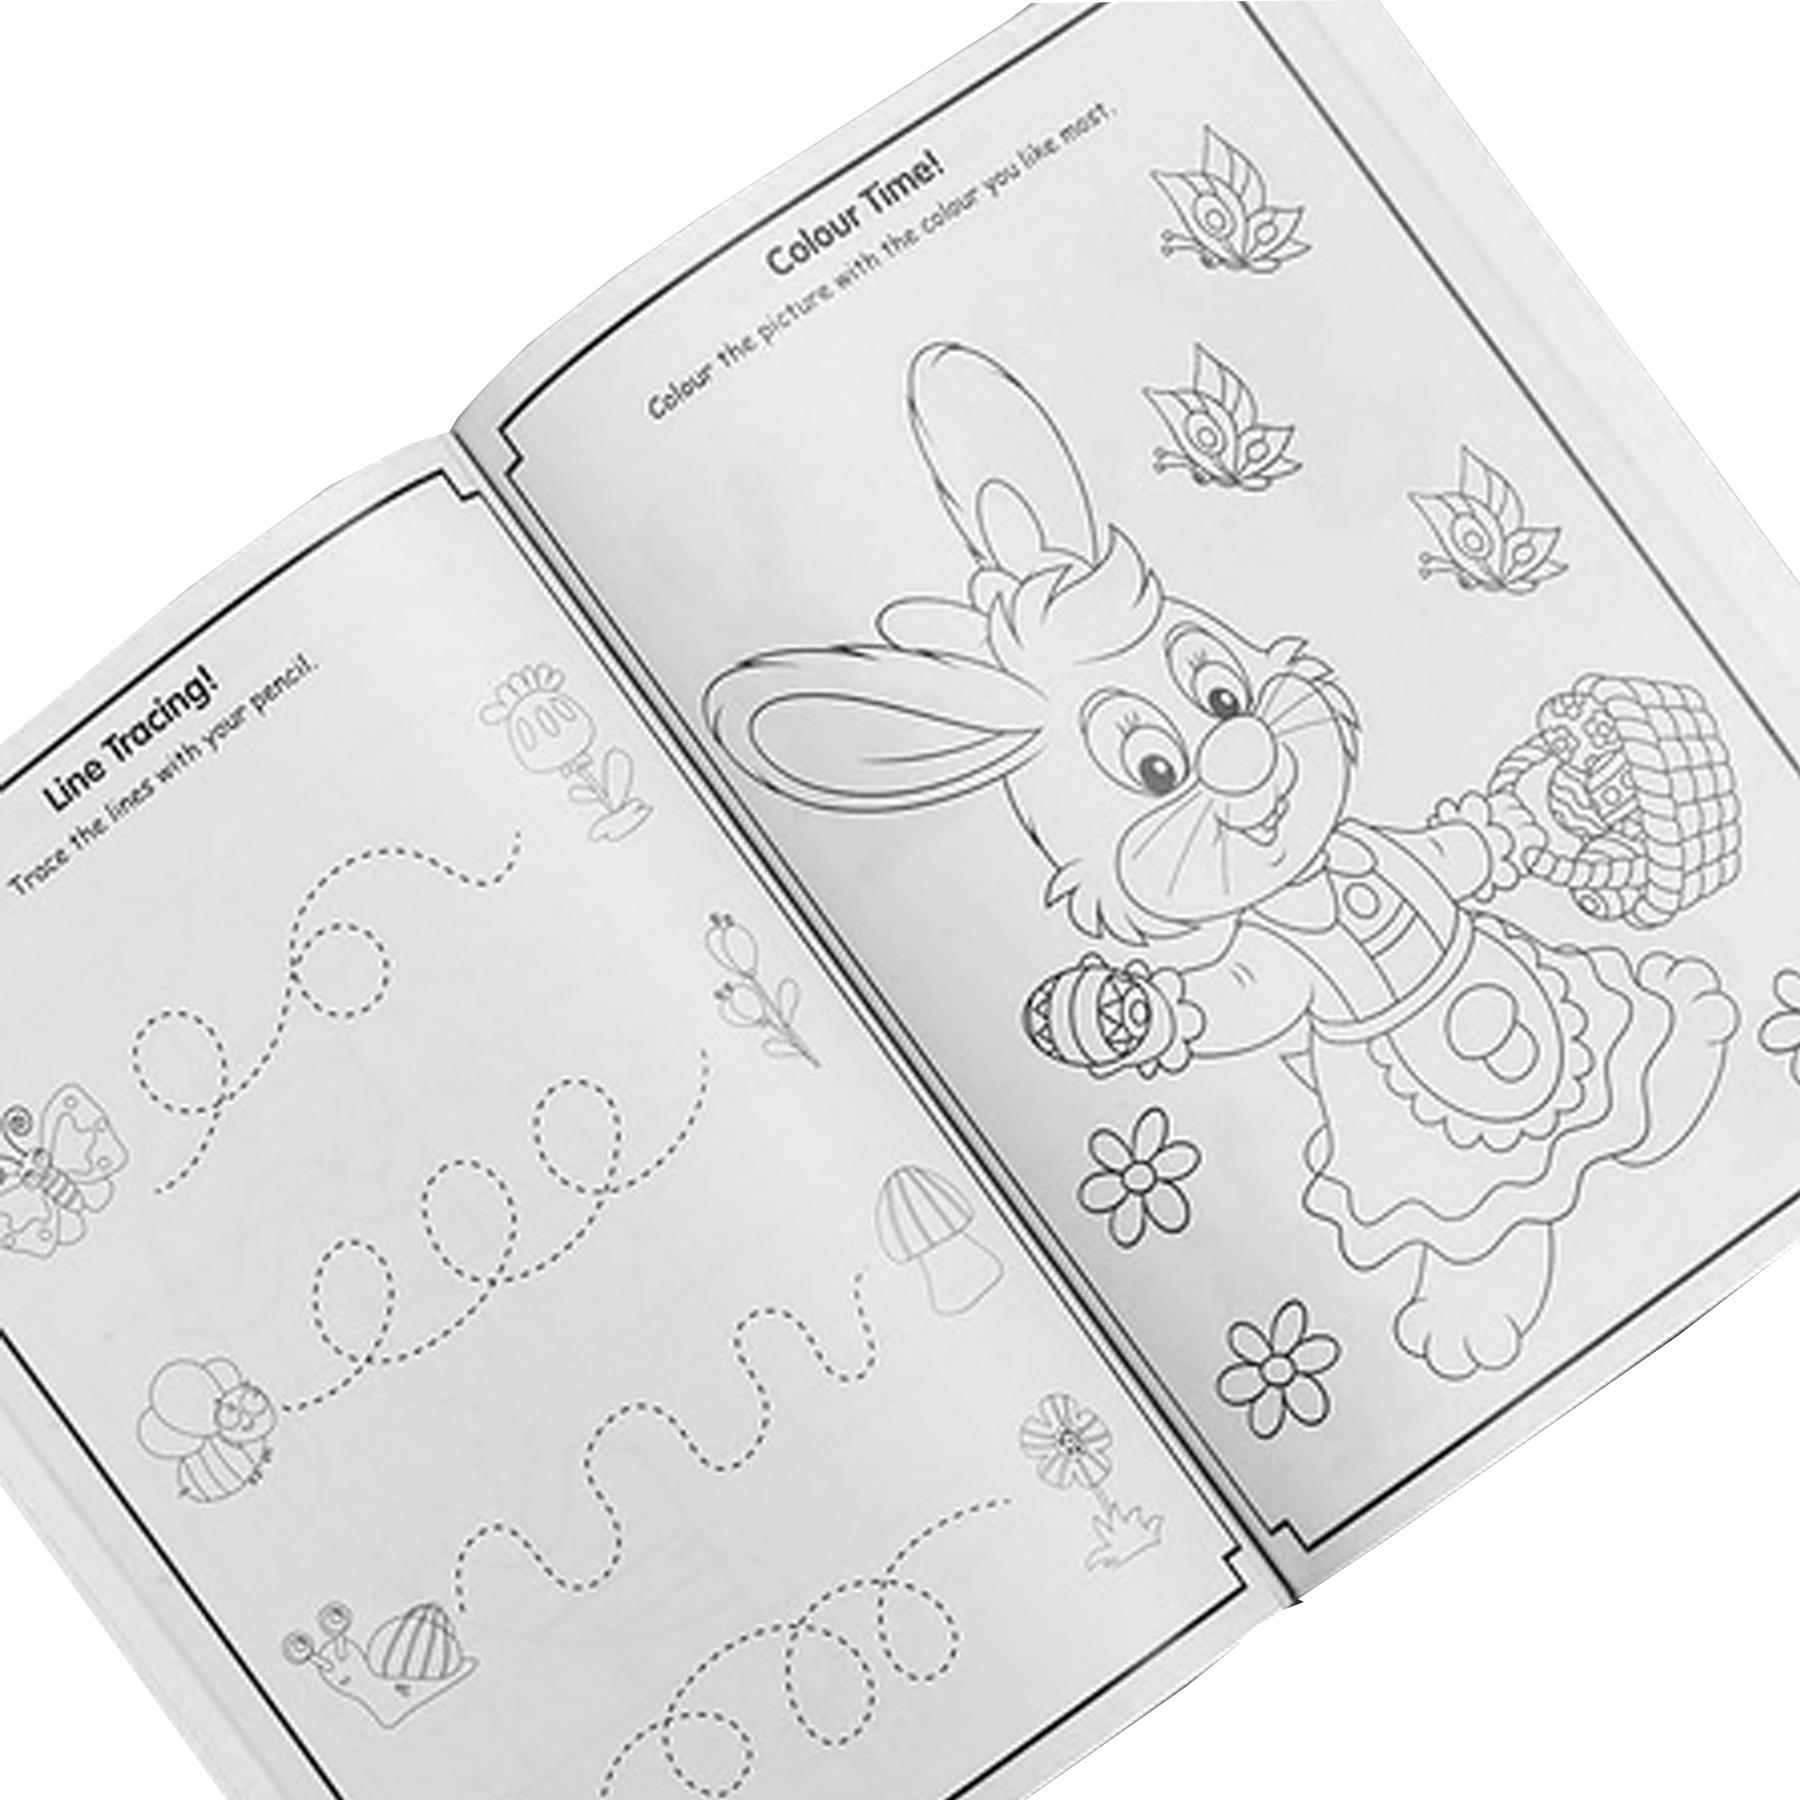 Easter Arts and Crafts - Activity Book